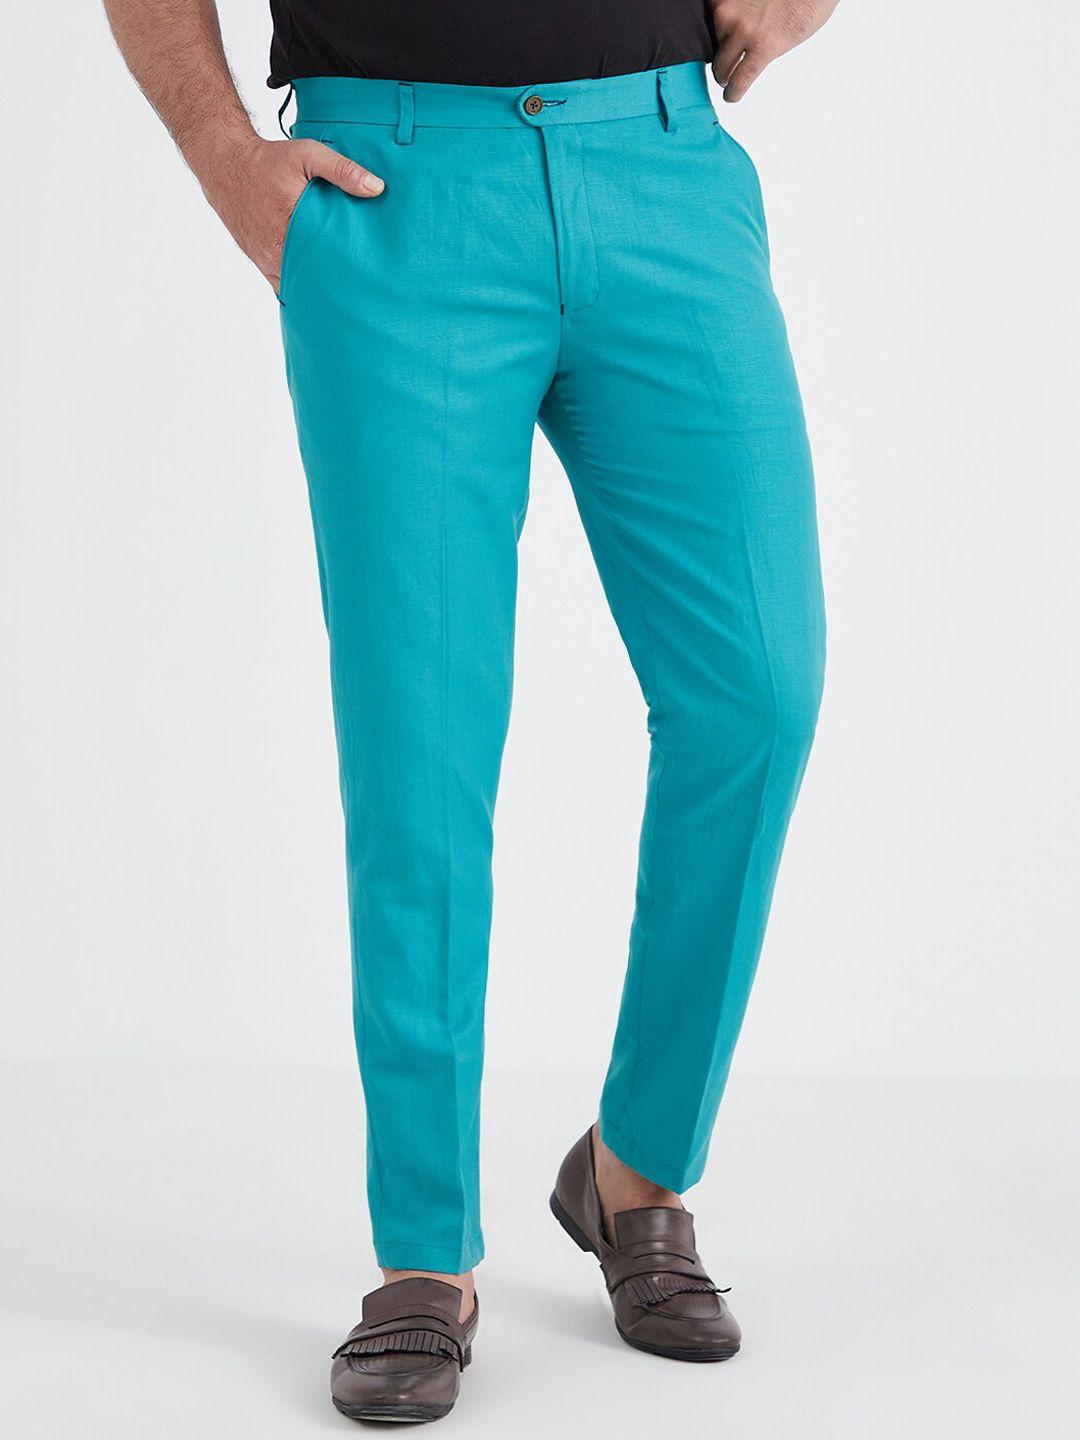 mr-button-men-blue-slim-fit-chinos-trousers